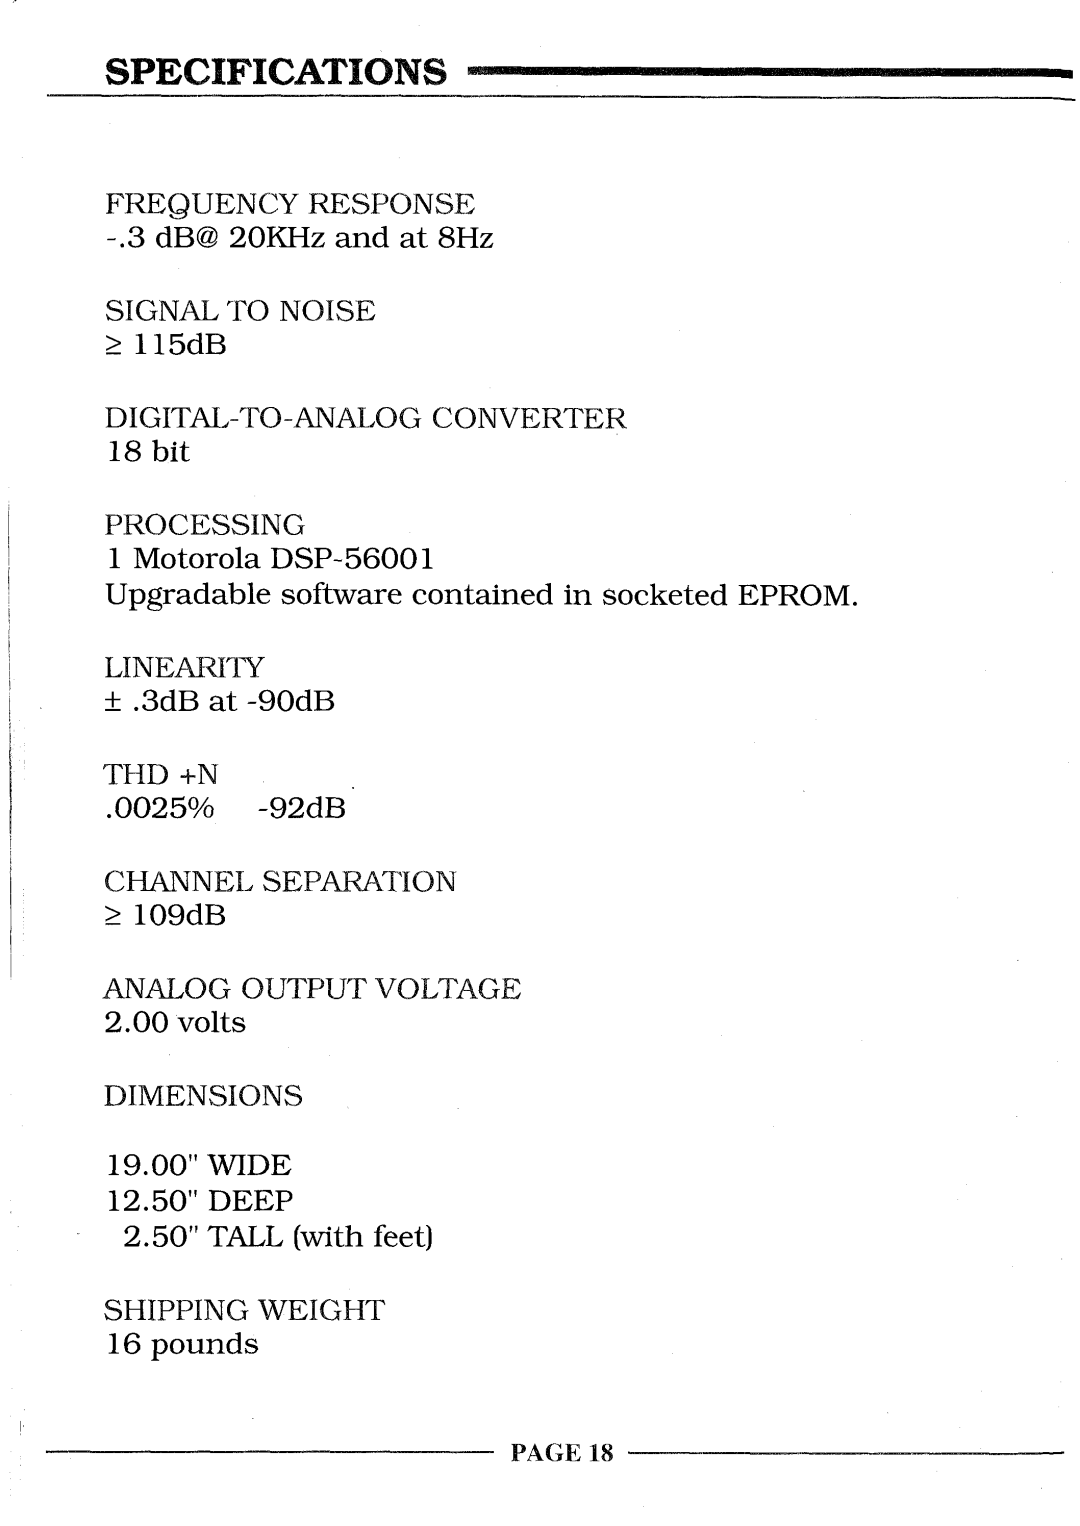 Krell Industries STUDIO 2 manual Specifications, PAGE18 